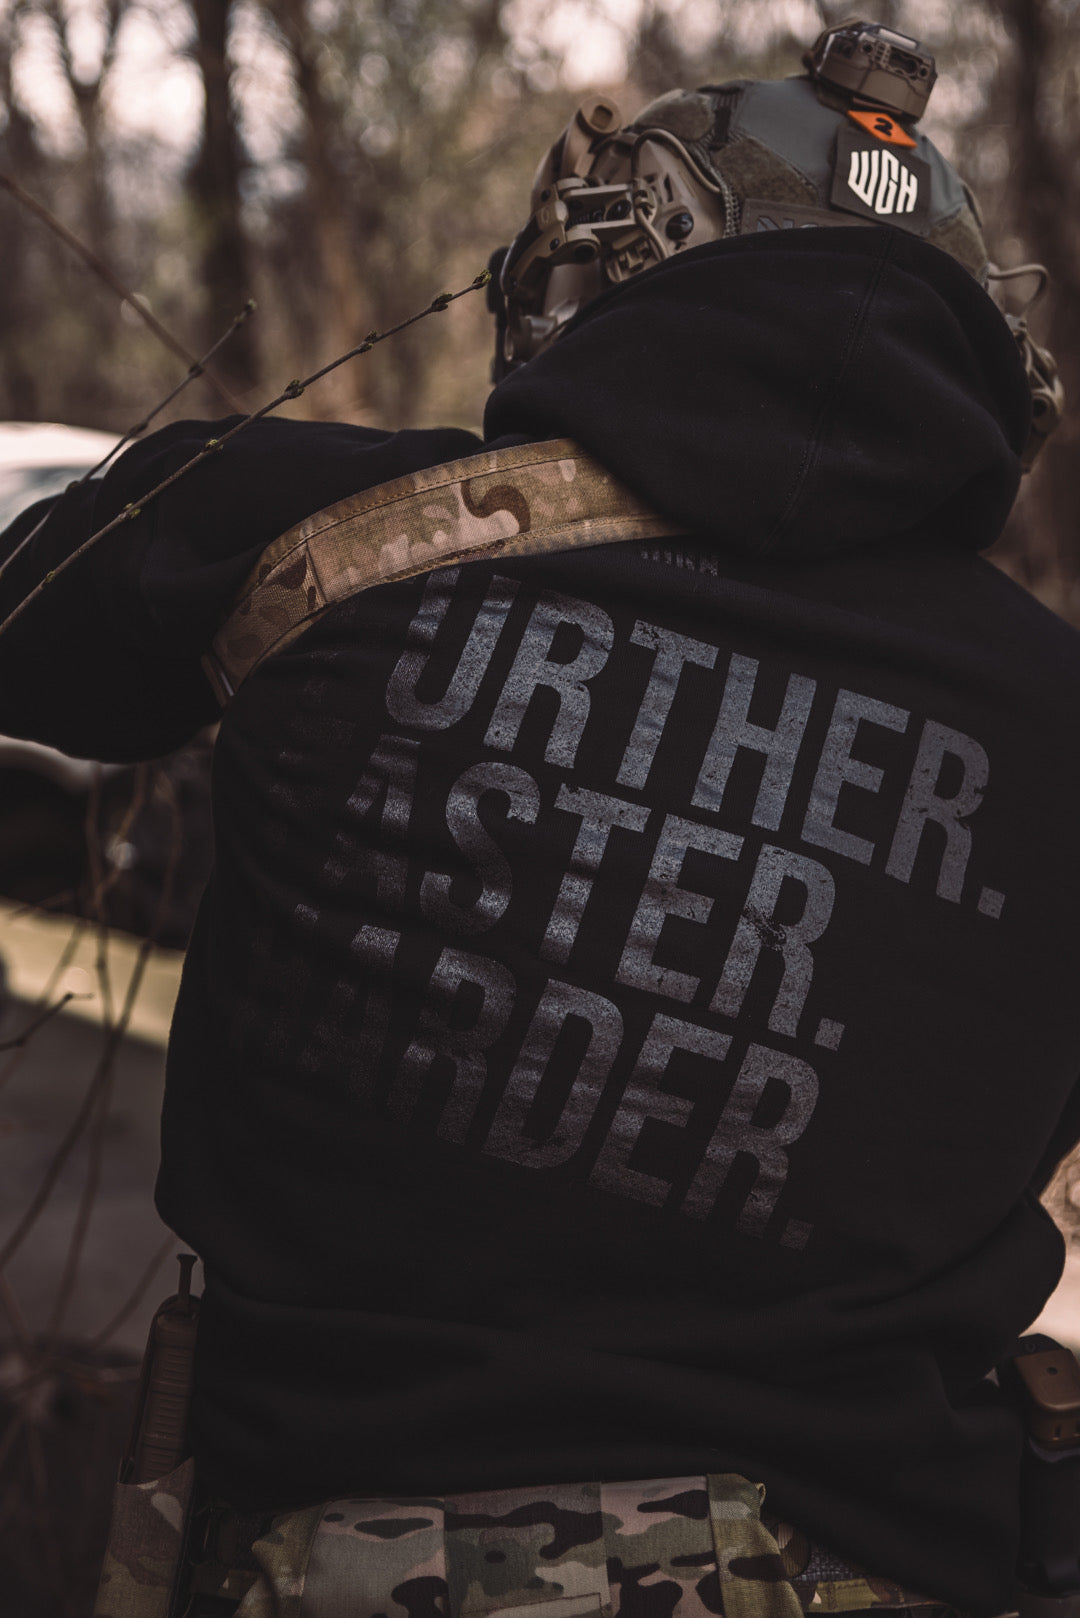 Further Faster Harder - Hoodie